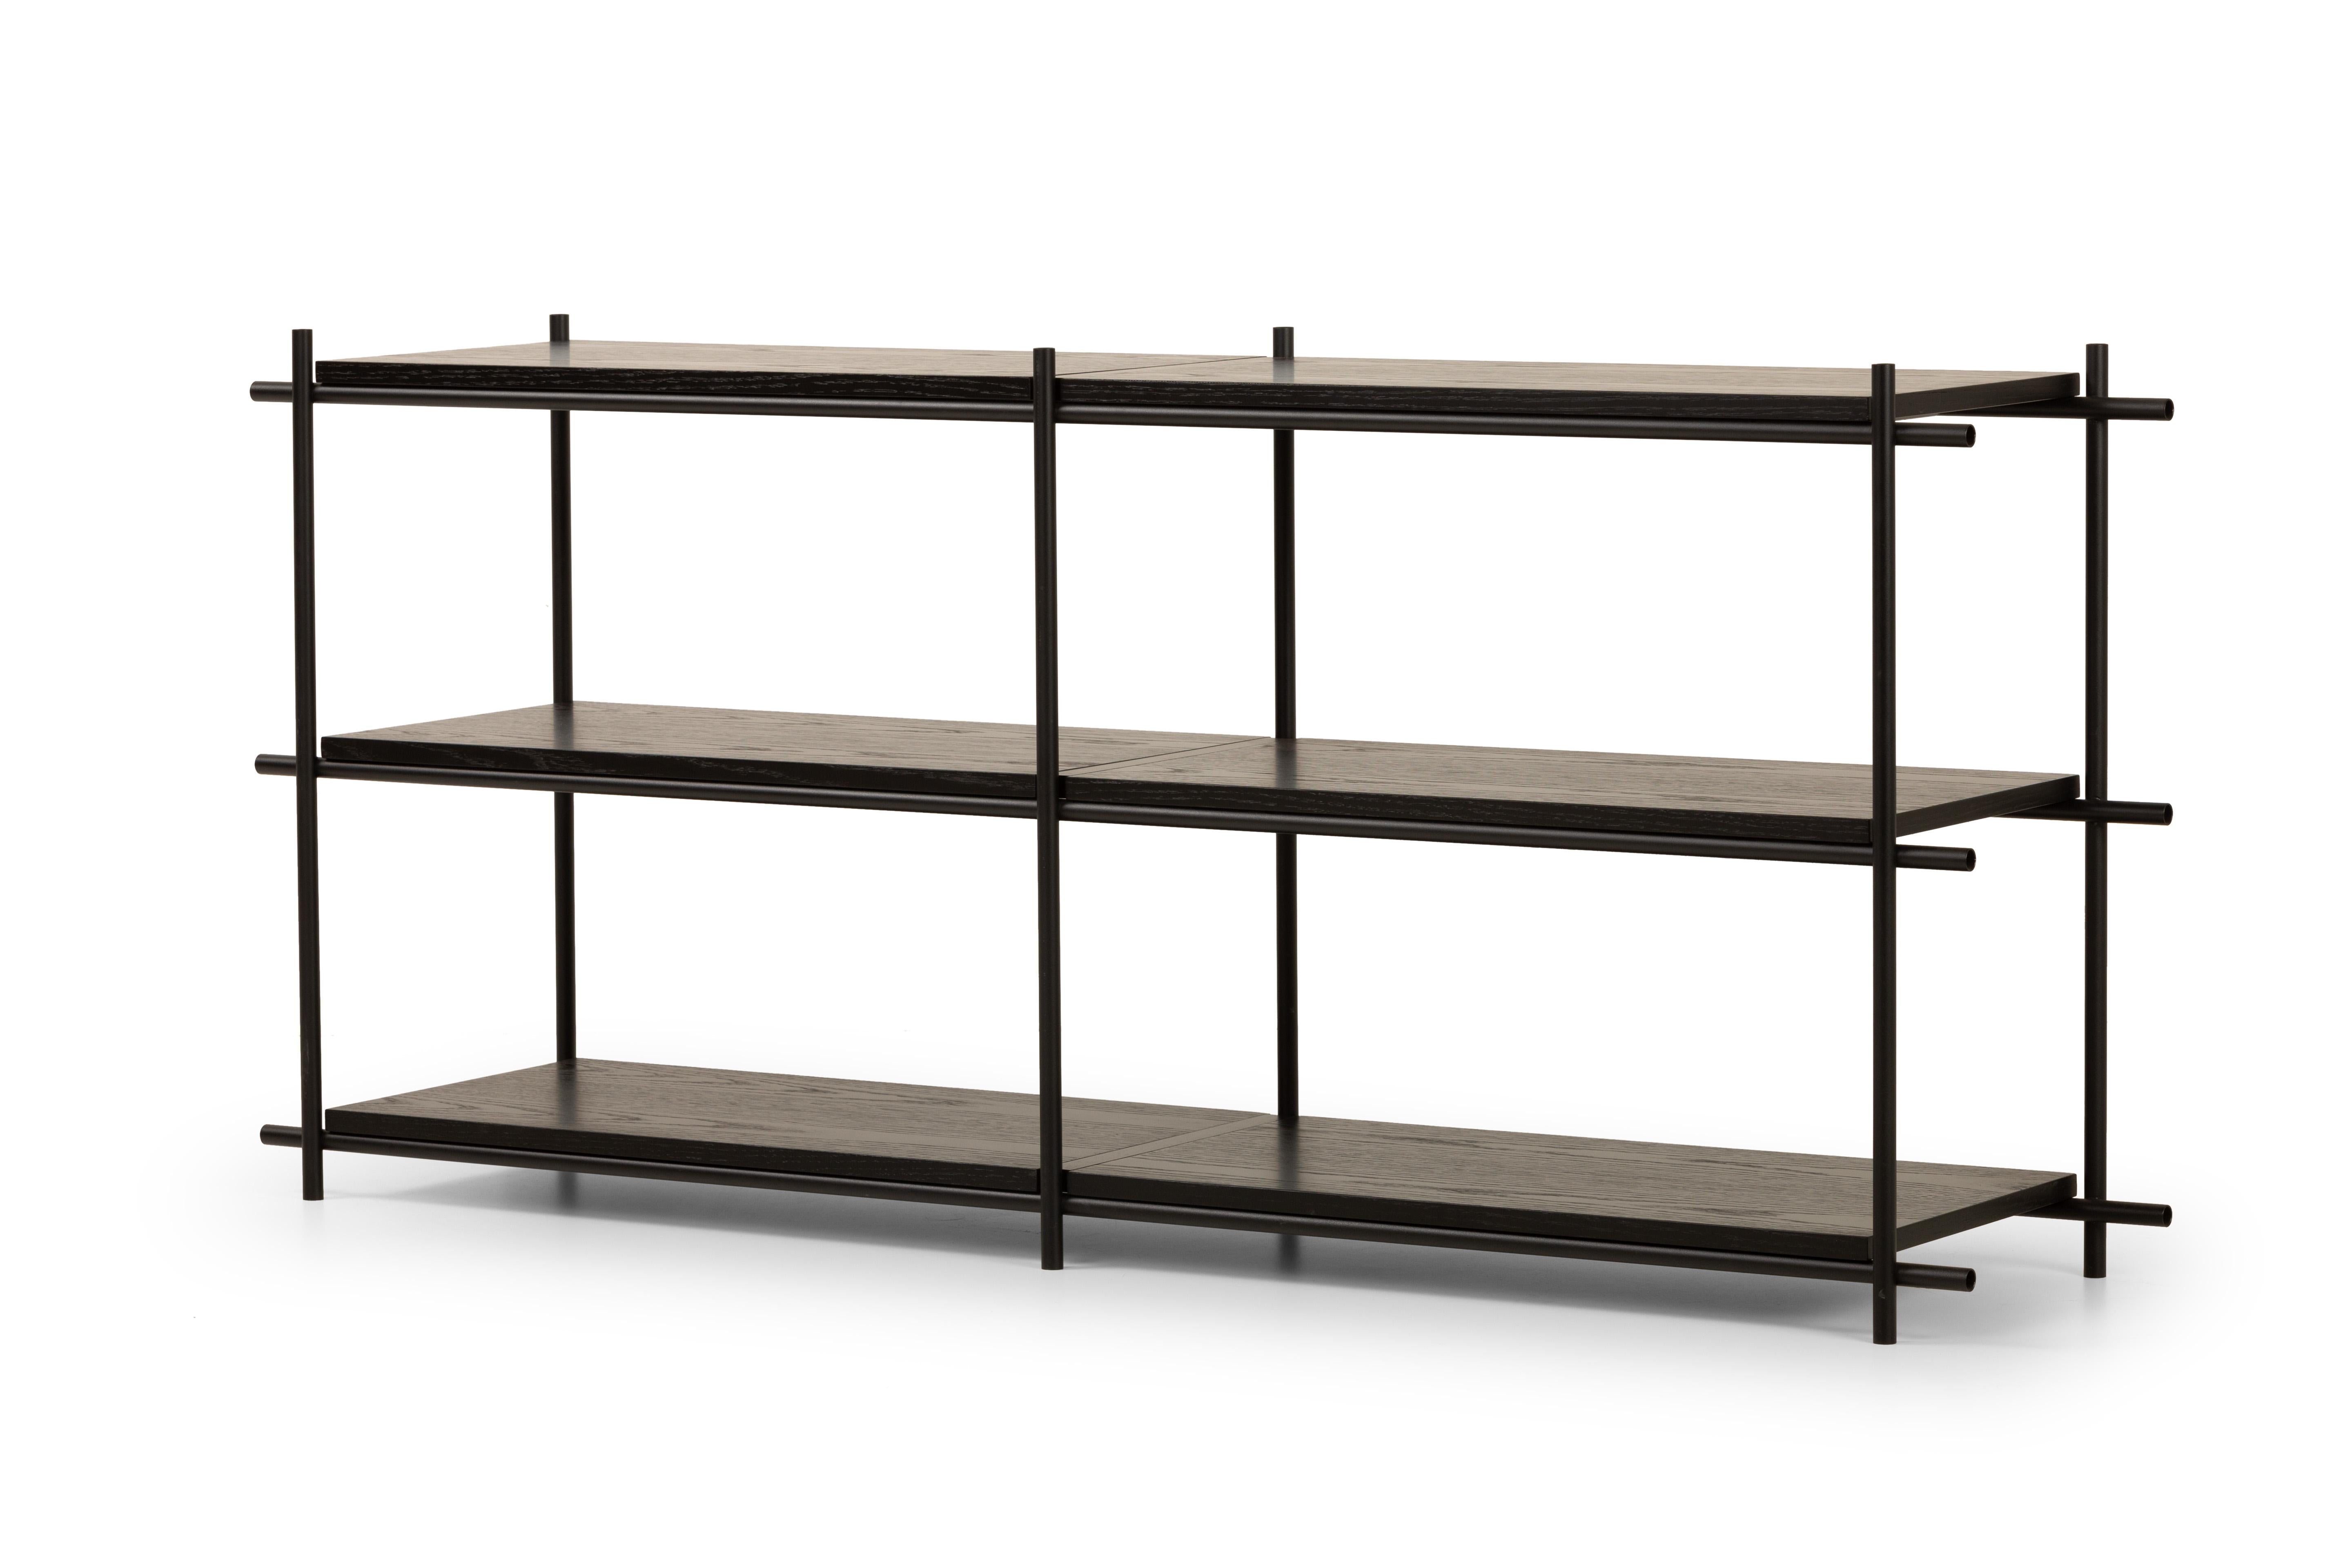 Innocent Bookshelf Four Modules by Mingardo
Dimensions: D166 x W39 x H76cm 
Materials: RAL 9005 black varnished iron structure, shelf in black stained oak
Weight: 85 kg

Also Available in different dimensions.

The Innocent project is